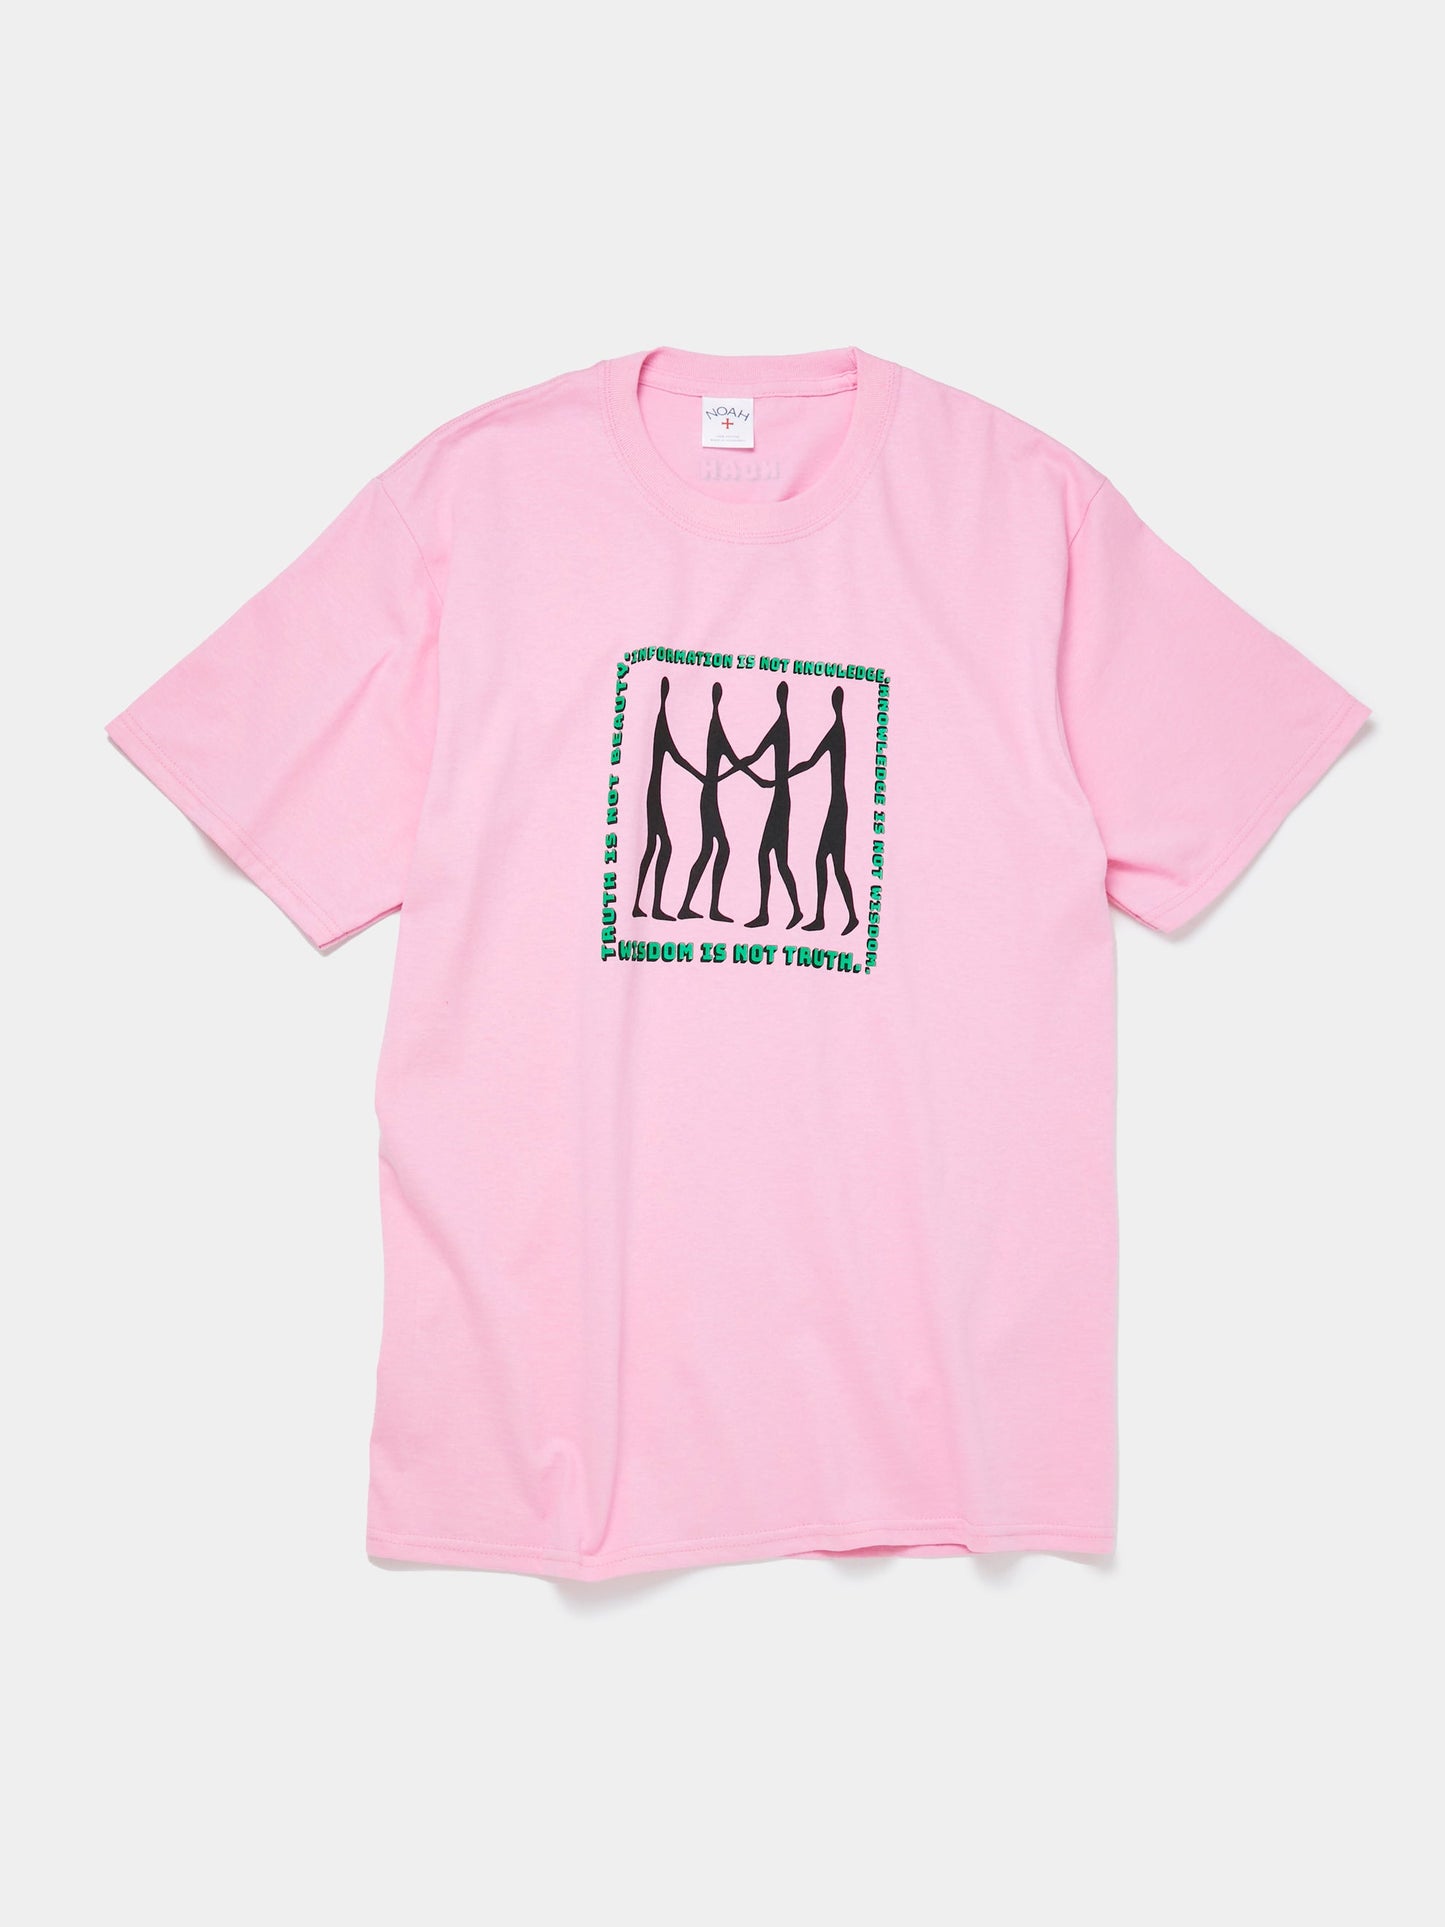 Truth is Beauty Tee (Pink)